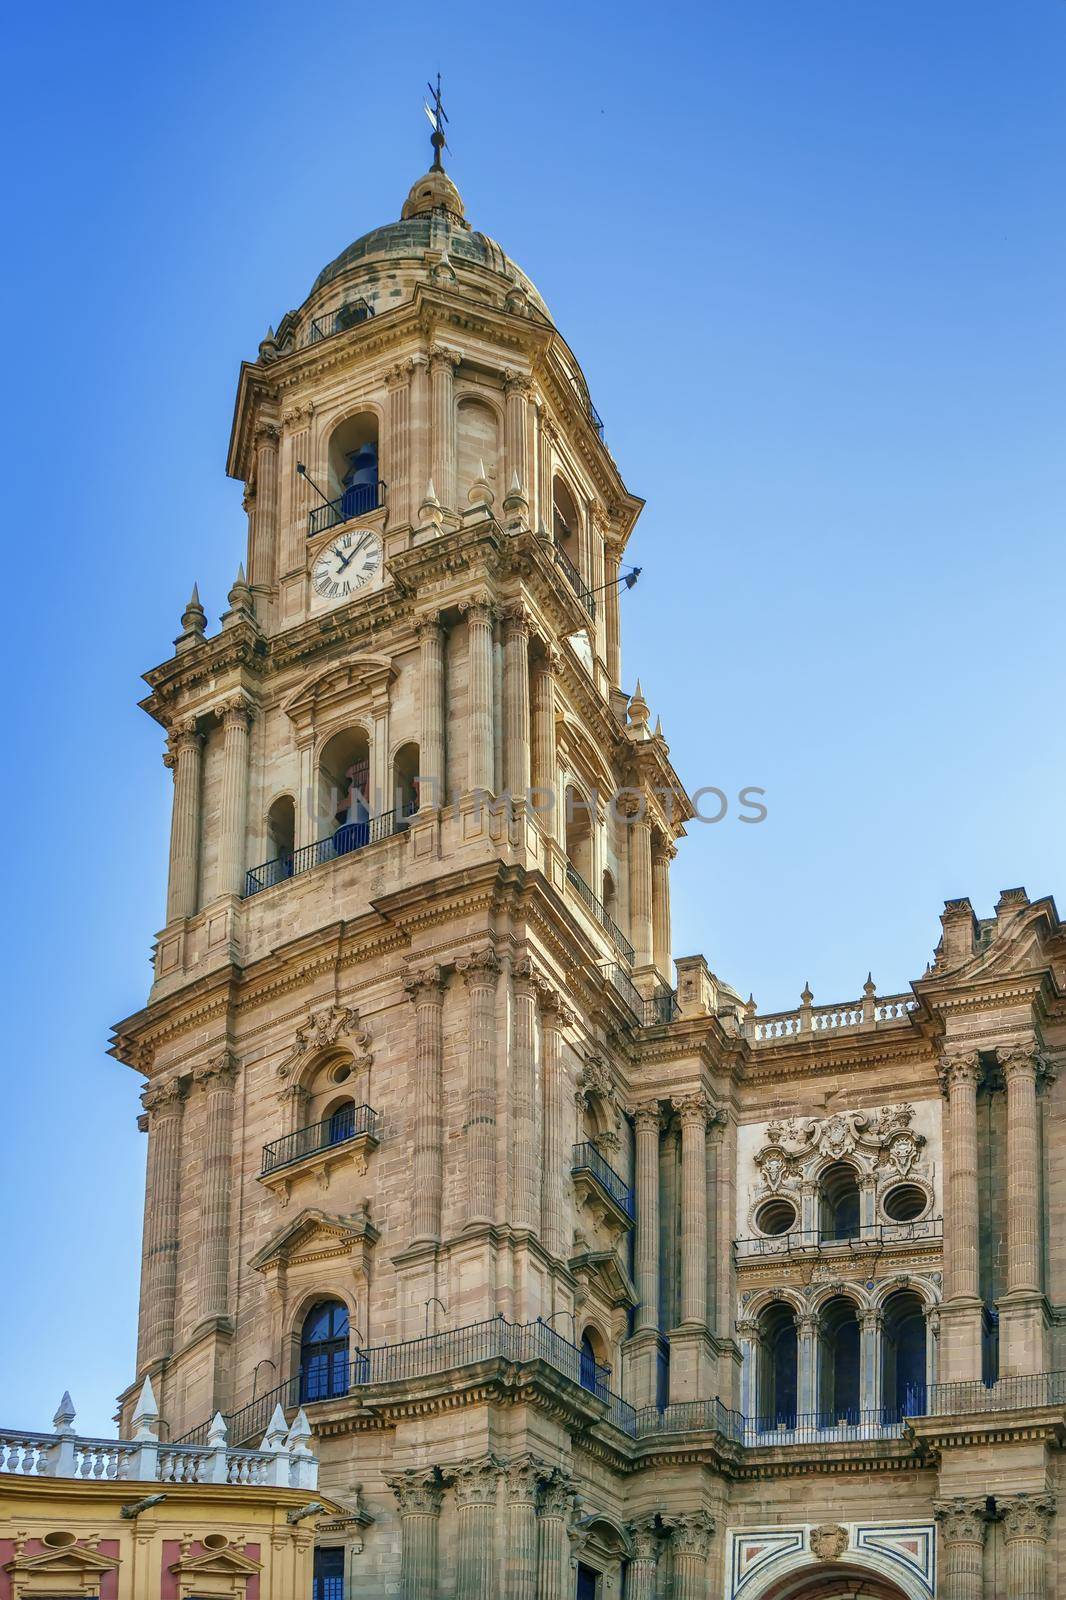 Cathedral of Malaga is a Renaissance church in the city of Malaga in Andalusia in southern Spain.It was constructed between 1528 and 1782